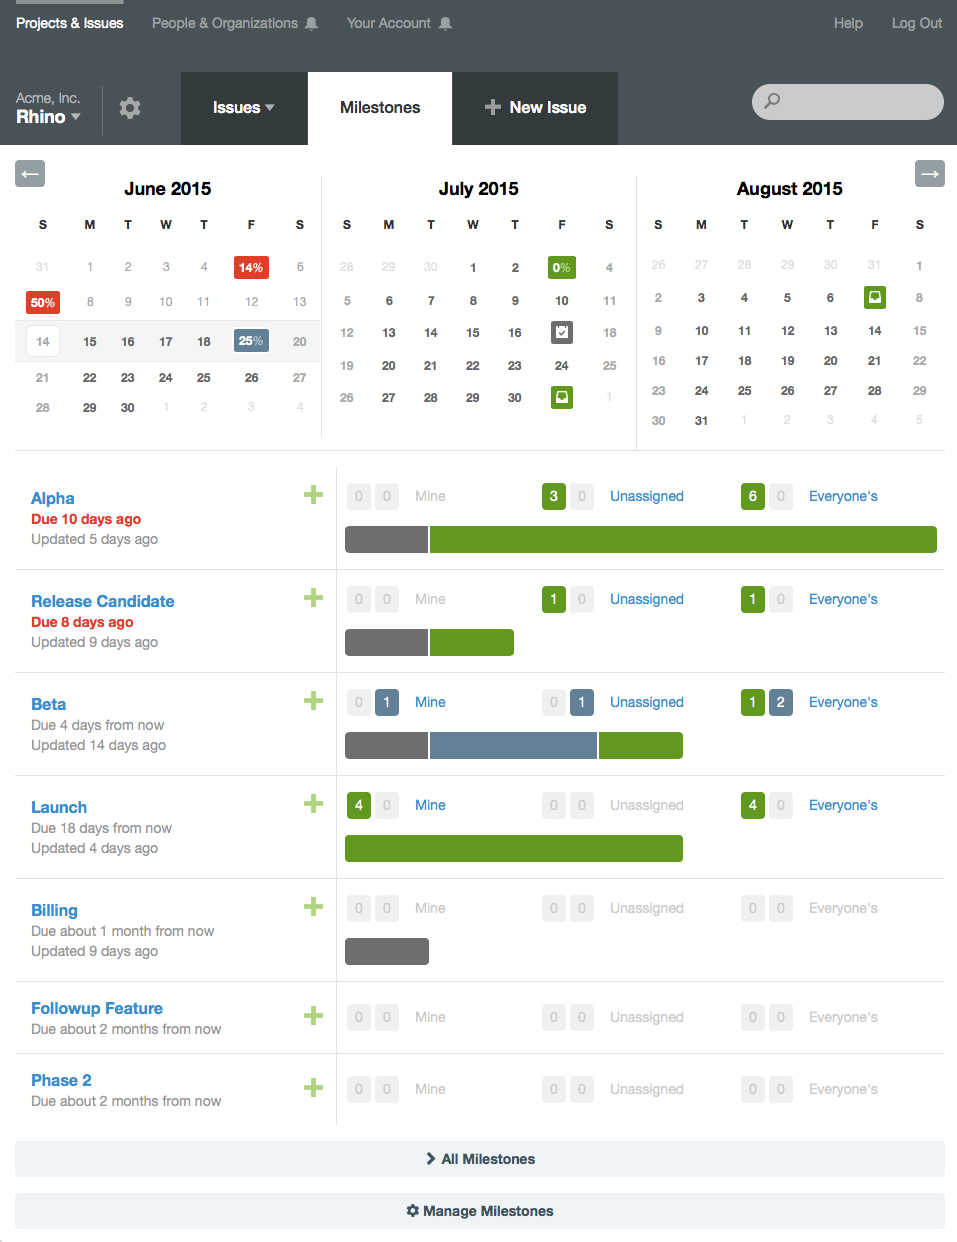 A screenshot of the milestone listing page with a calendar to help visualize progress towards upcoming milestones.